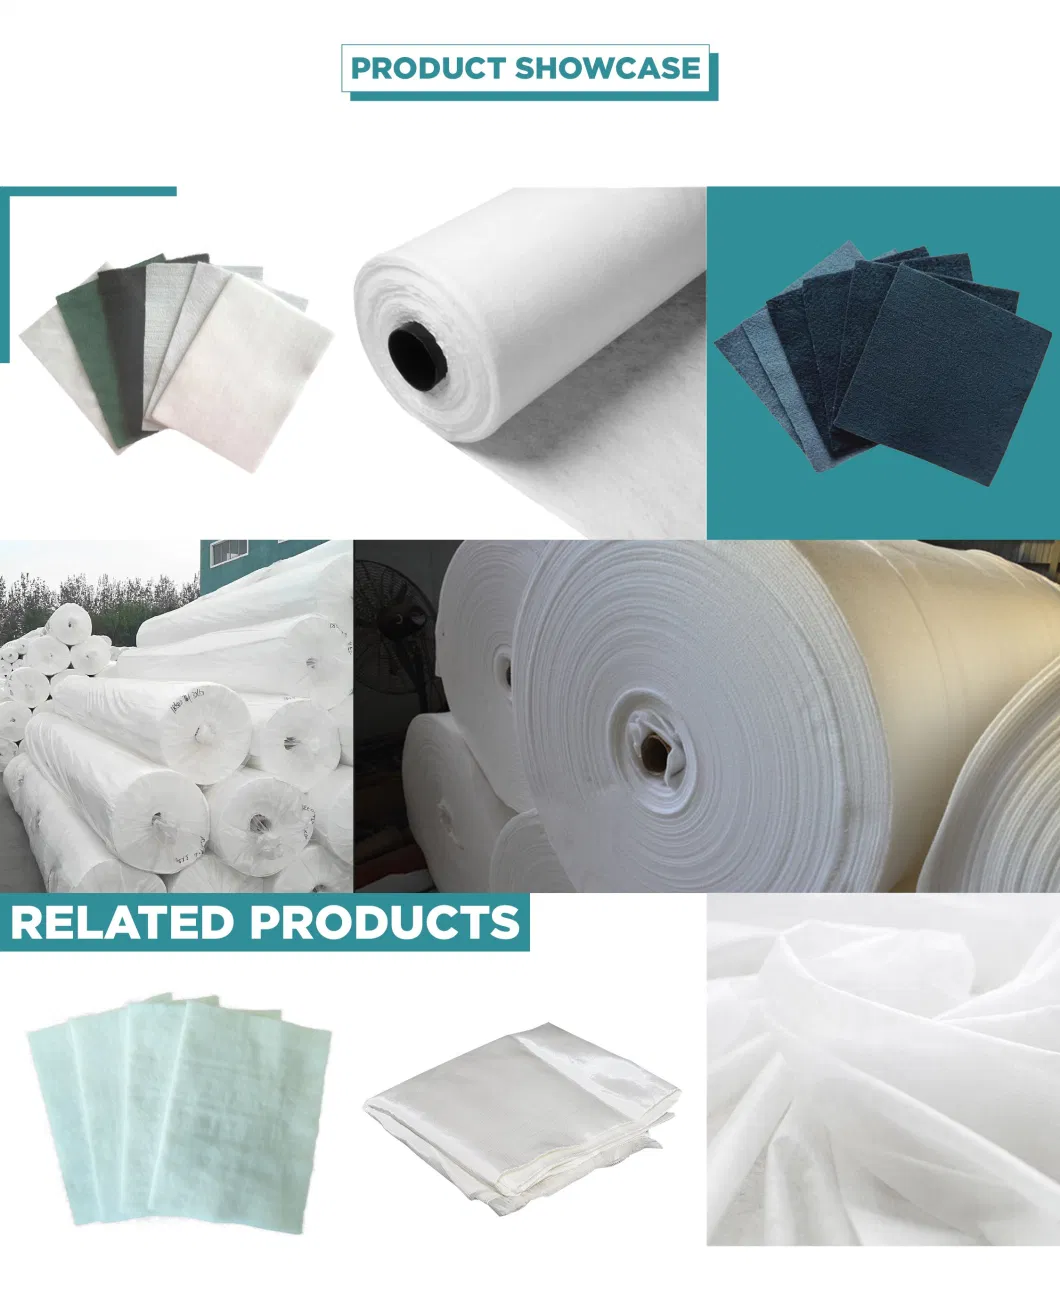 China Factory Price PP/Pet Continuous Filament Staple/Short Fiber Polyester Polypropylene Needle Punched Spunbonded Nonwoven Fabric Non Woven Geotextile